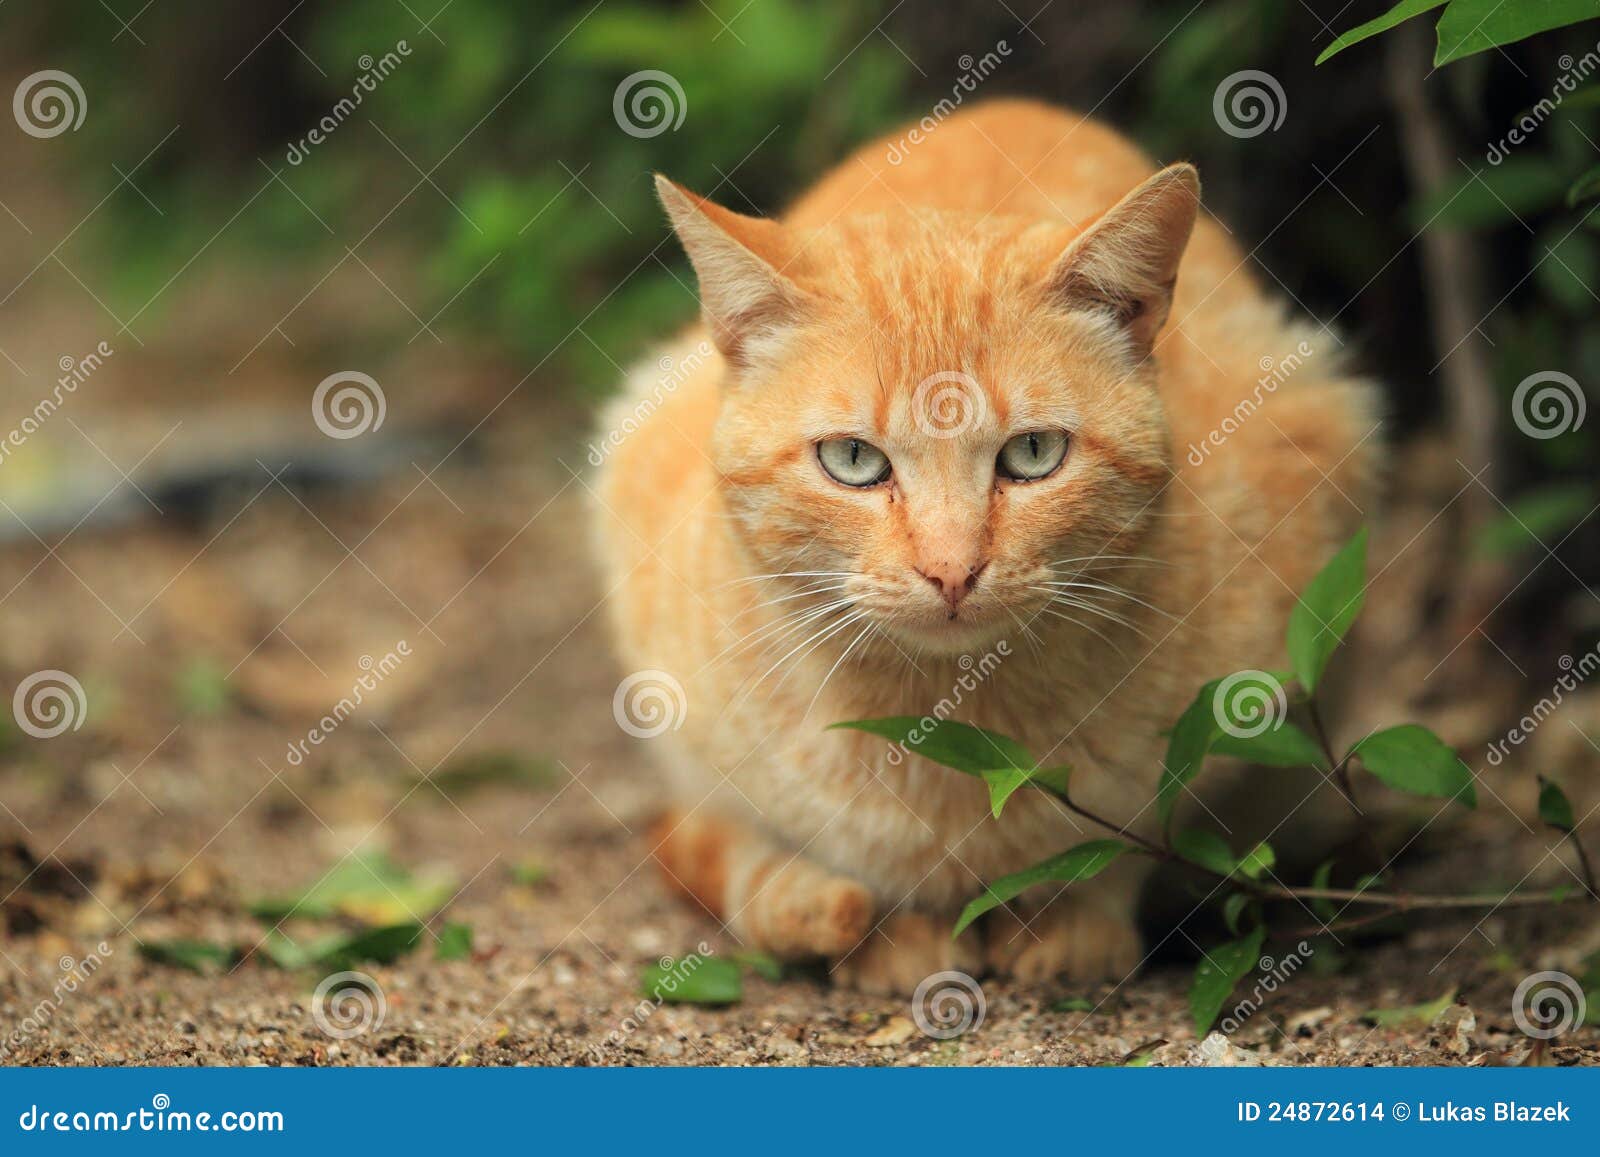 Red-haired cat stock photo. Image of adult, grass, mammal - 24872614